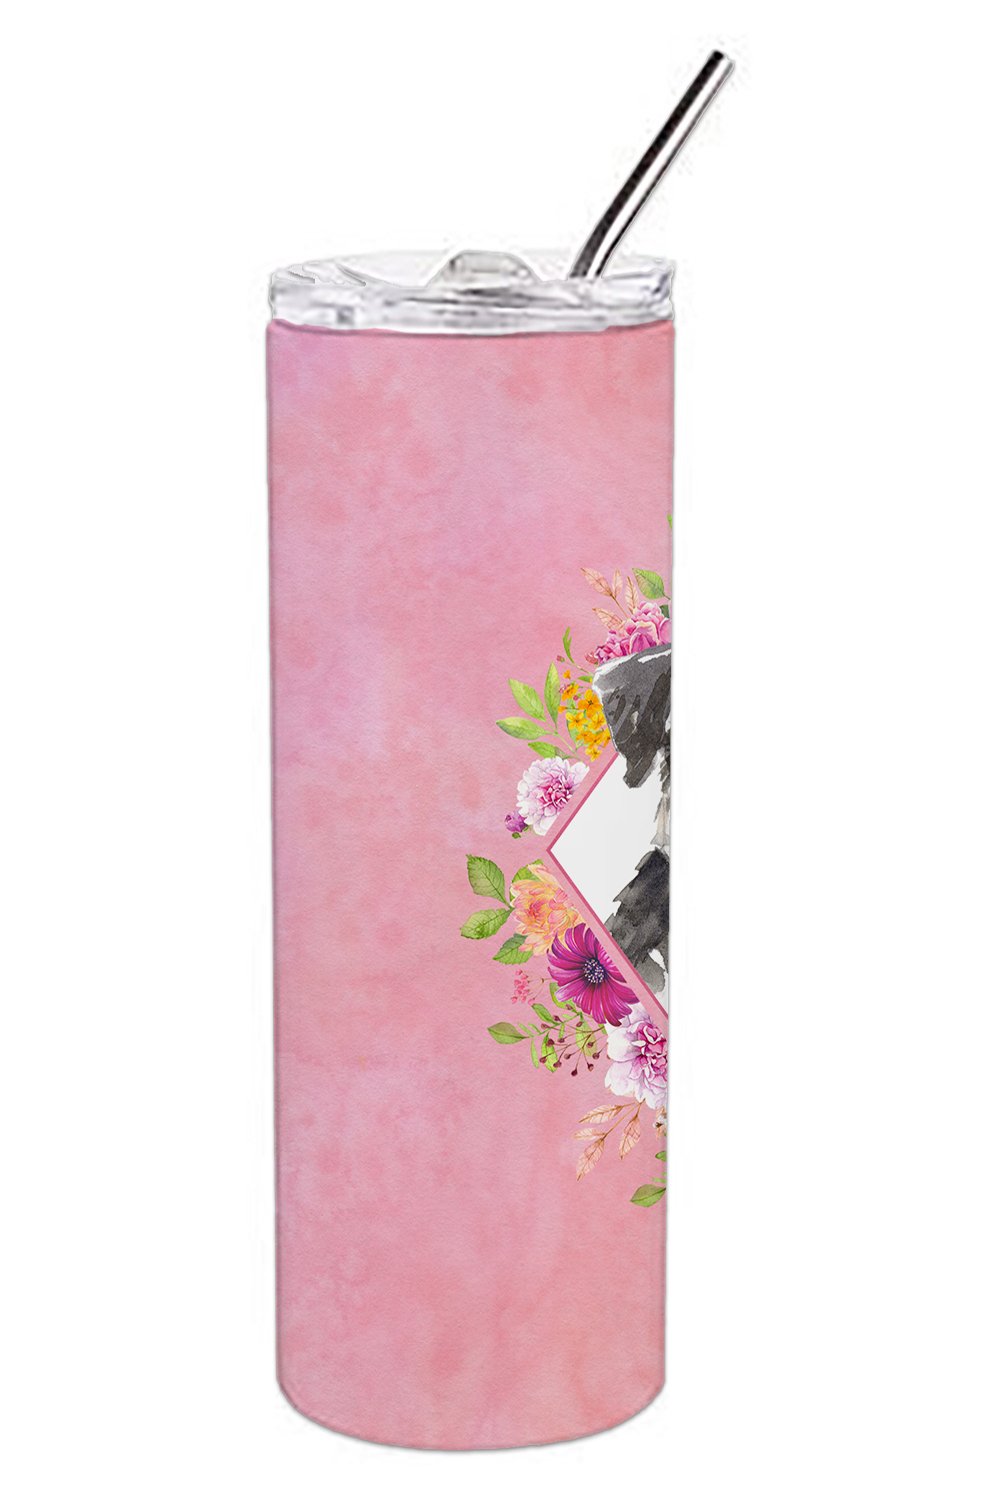 Schnauzer #2 Pink Flowers Double Walled Stainless Steel 20 oz Skinny Tumbler CK4222TBL20 by Caroline's Treasures